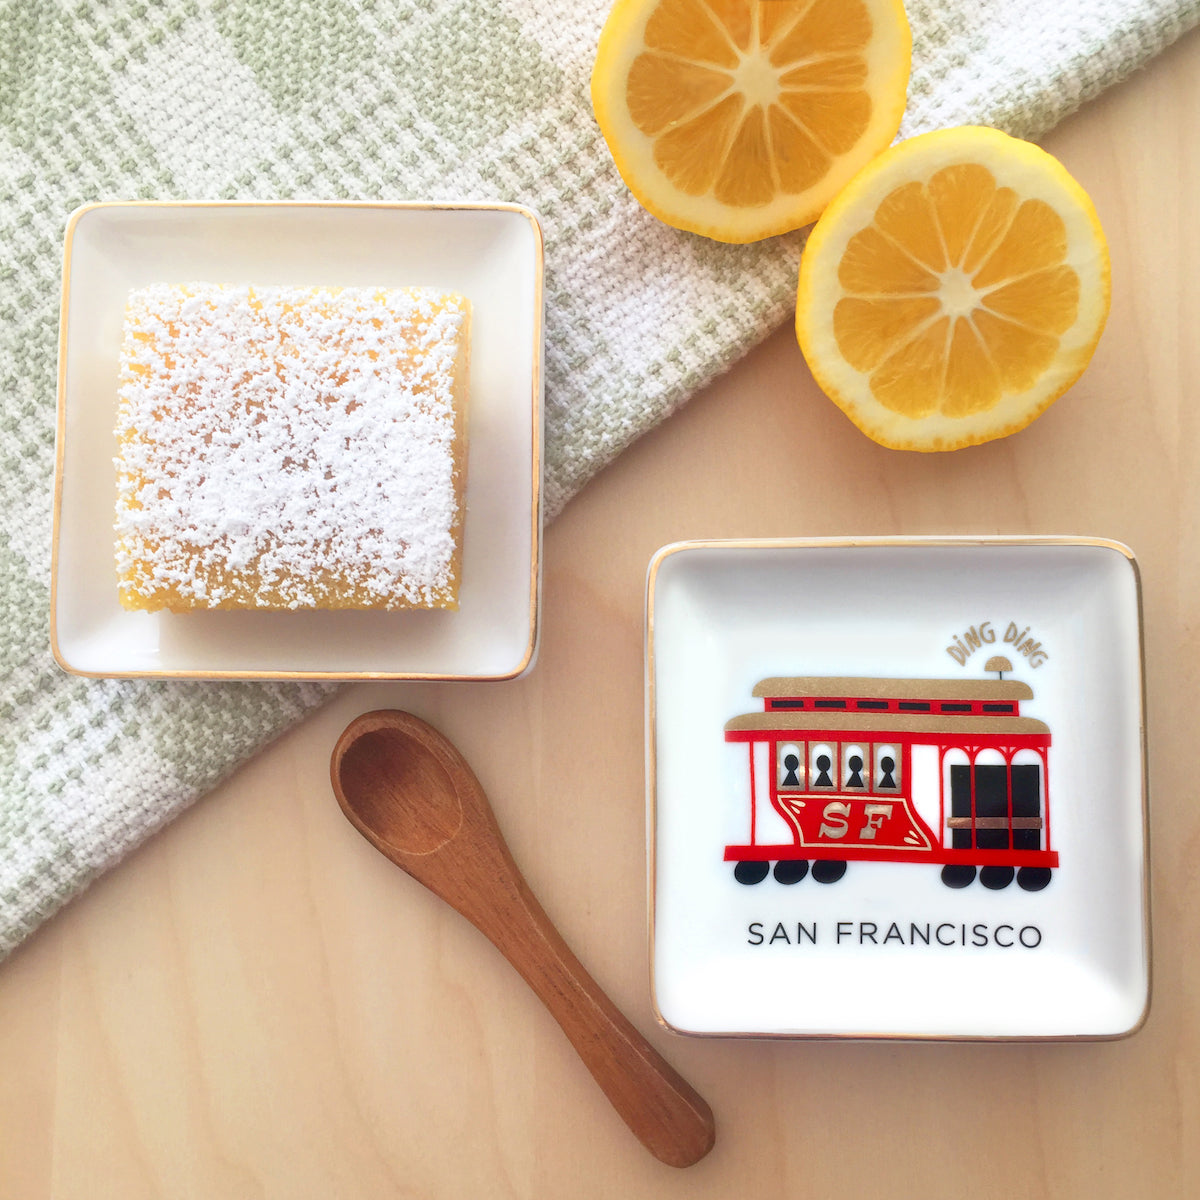 A lemon bar cookie, cut lemons, wooden spoon, tea towel, and small square ceramic dish featuring a colorful illustration of a San Francisco cable car with gold accents sit on a wooden table top.